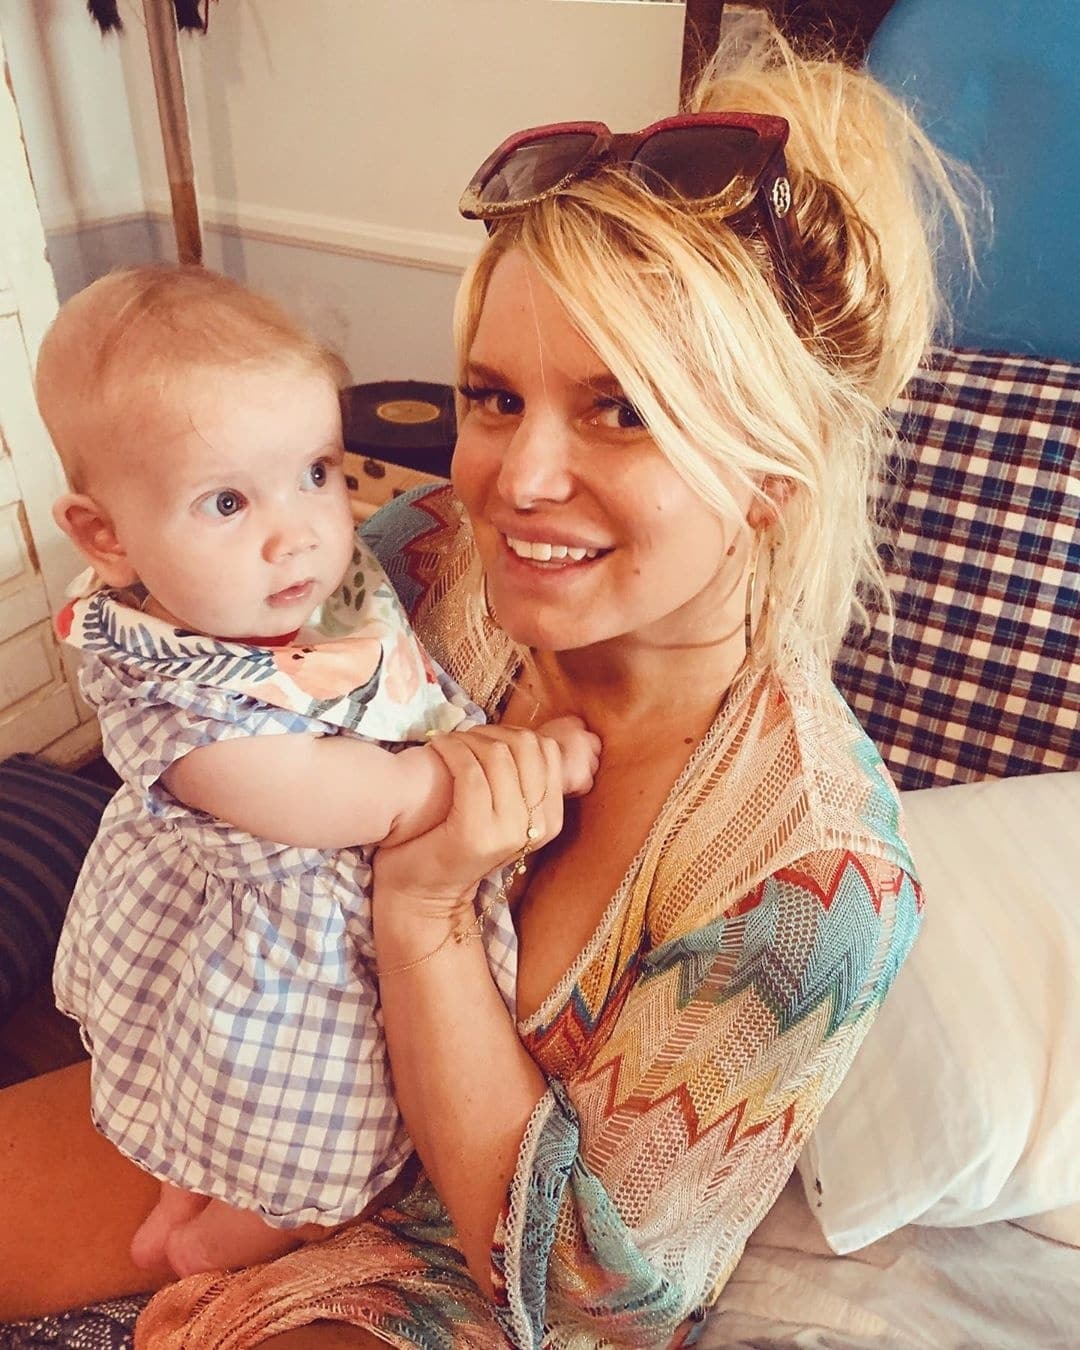 Jessica Simpson's postpartum weight loss story is about more than